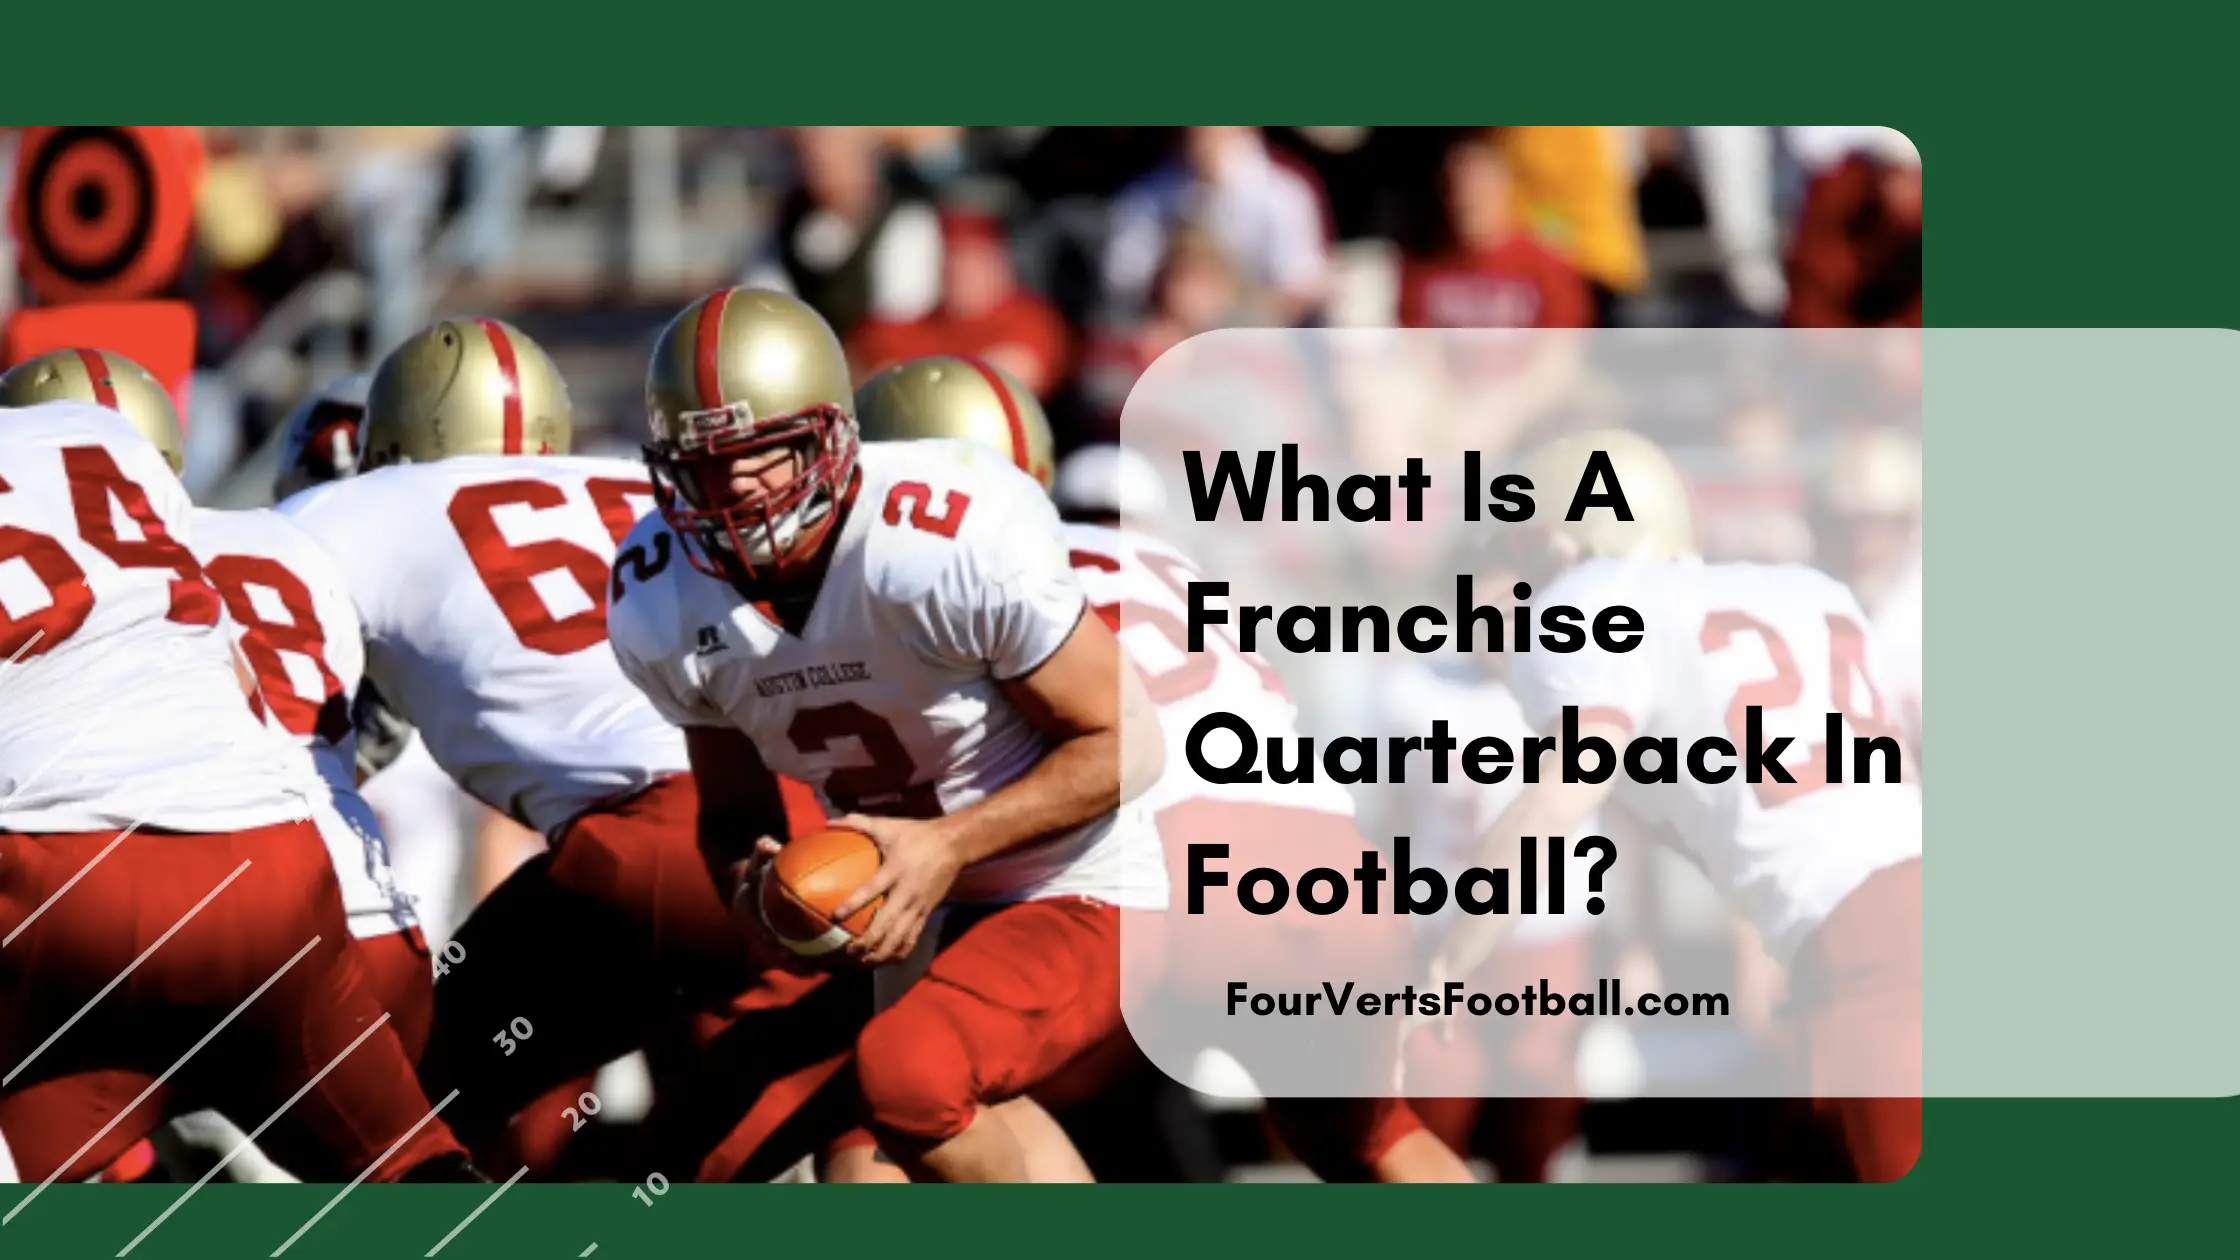 What Is A Franchise Quarterback In Football?